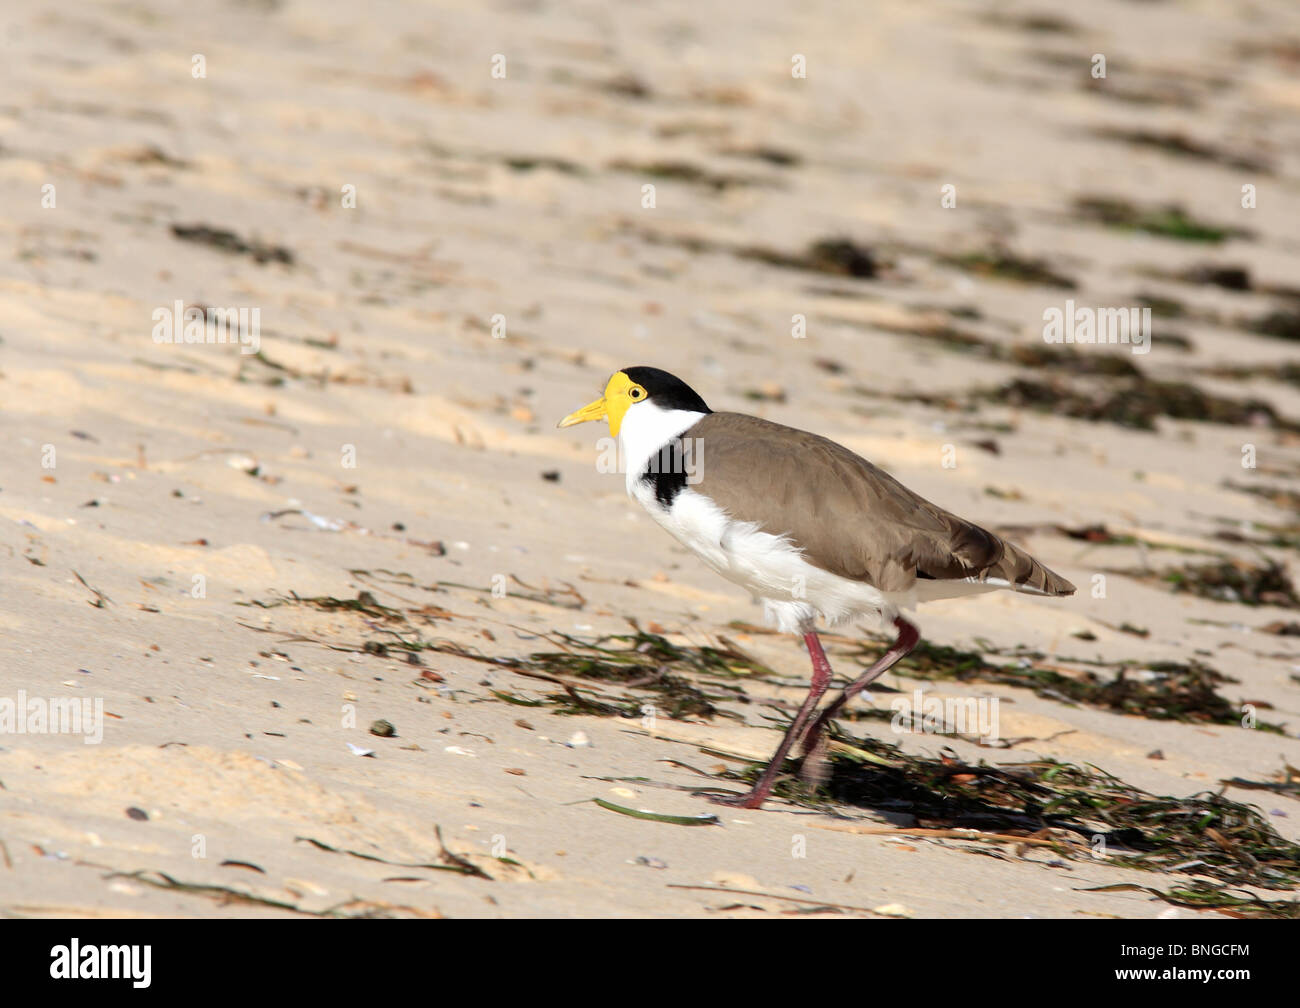 Spur-winged Plover, or Masked Lapwing, Vanellus miles novaehollandiae, walking on the beach Stock Photo